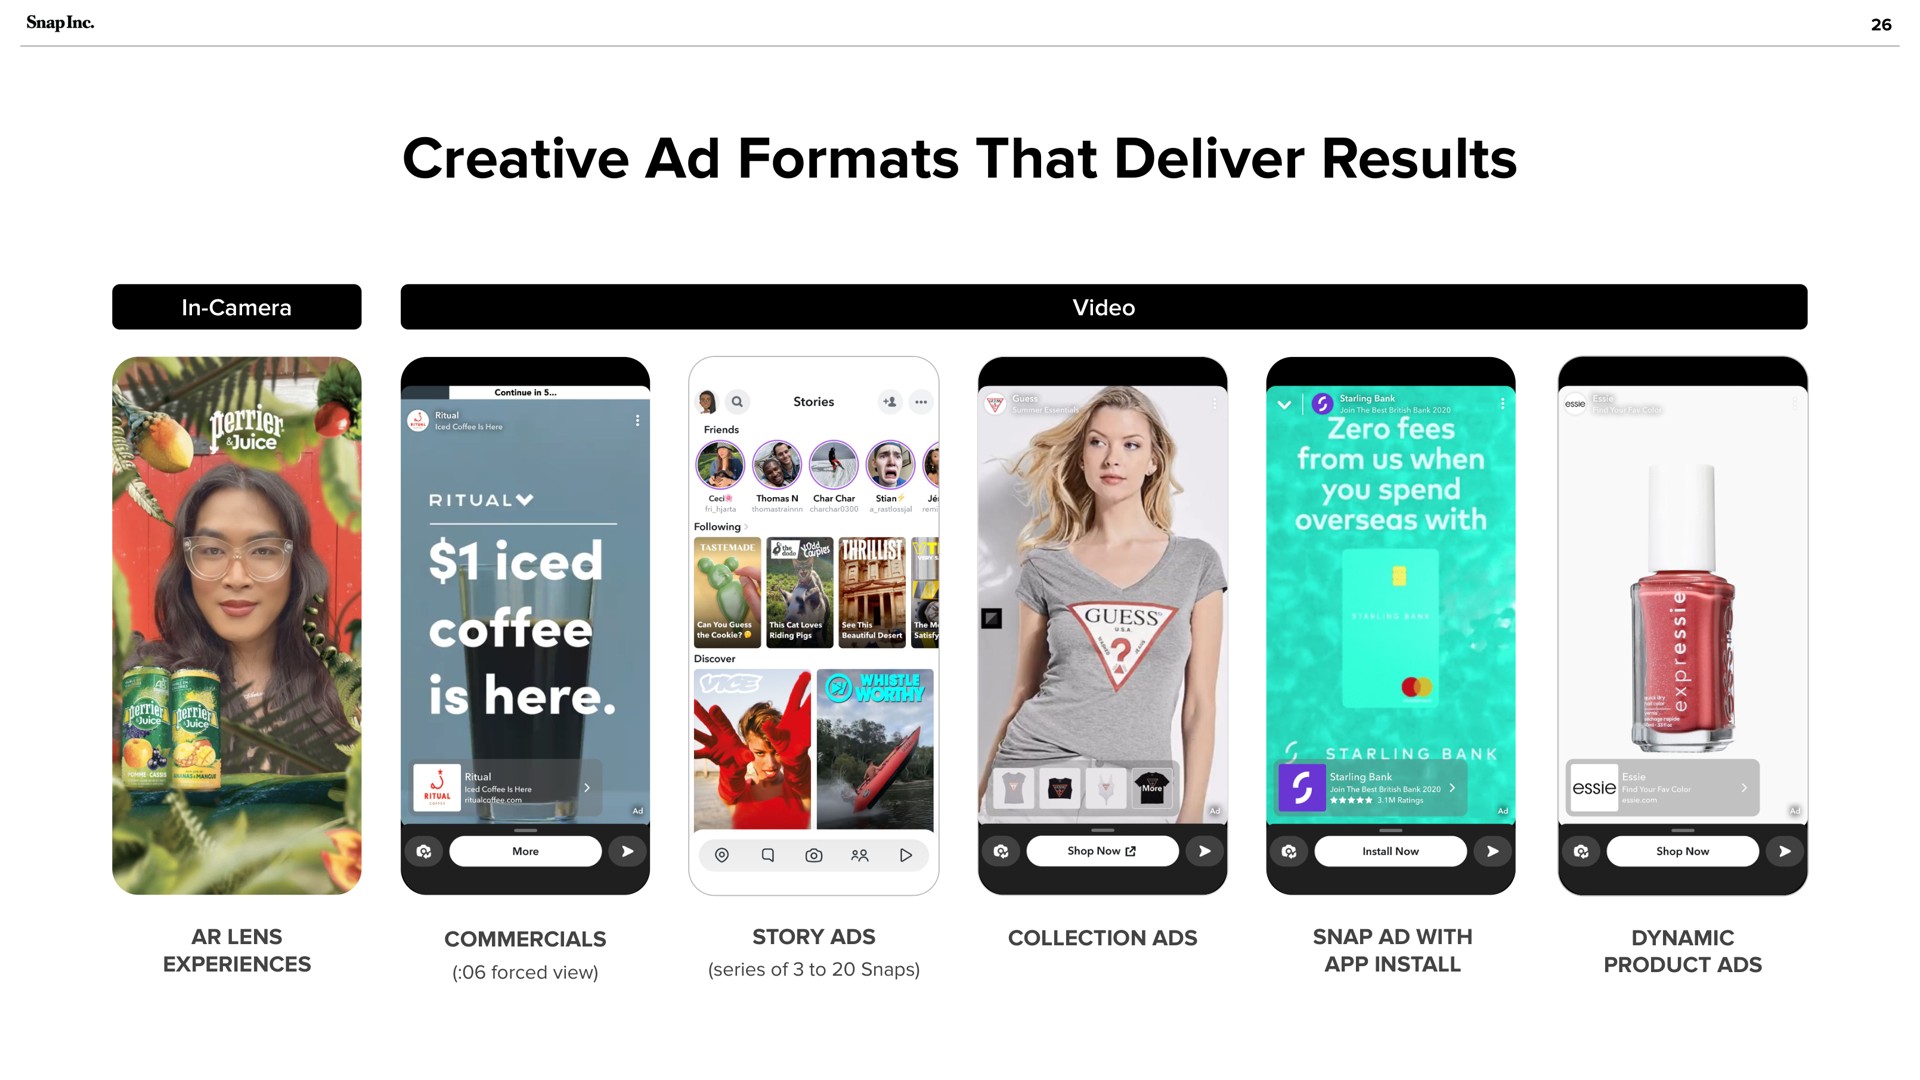 creative formats that deliver results get sliced coffee | Snap Inc